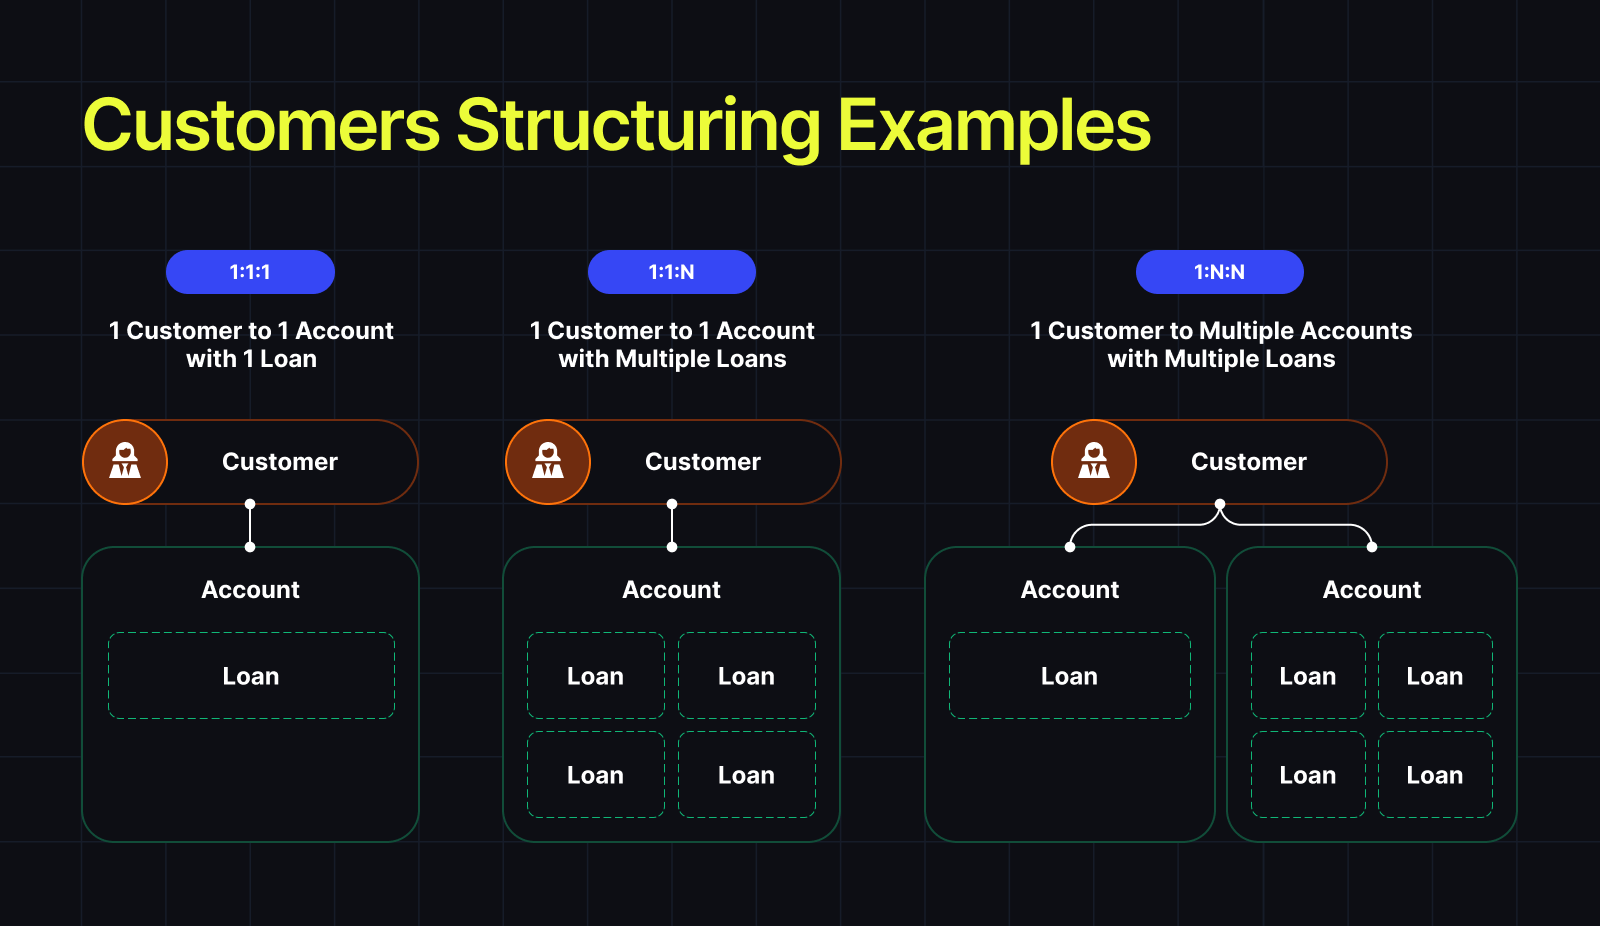 Customer Structuring Examples: The different account structures Canopy supports